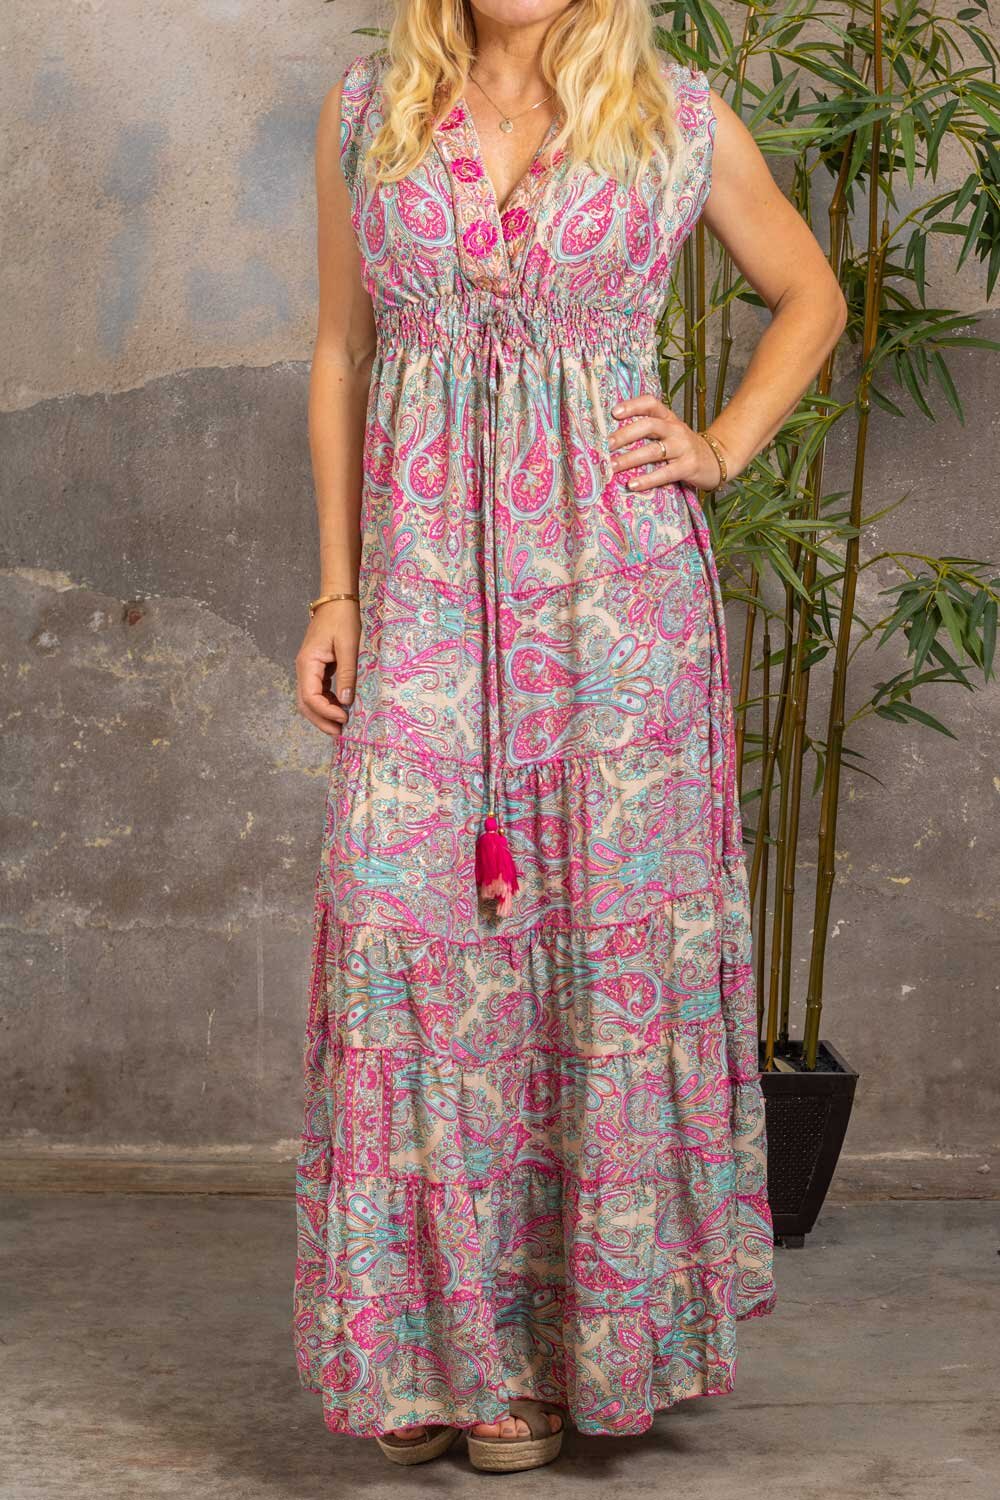 Evelyn Long Dress - Patterned & Embroidery Edge - Cerise/Blue